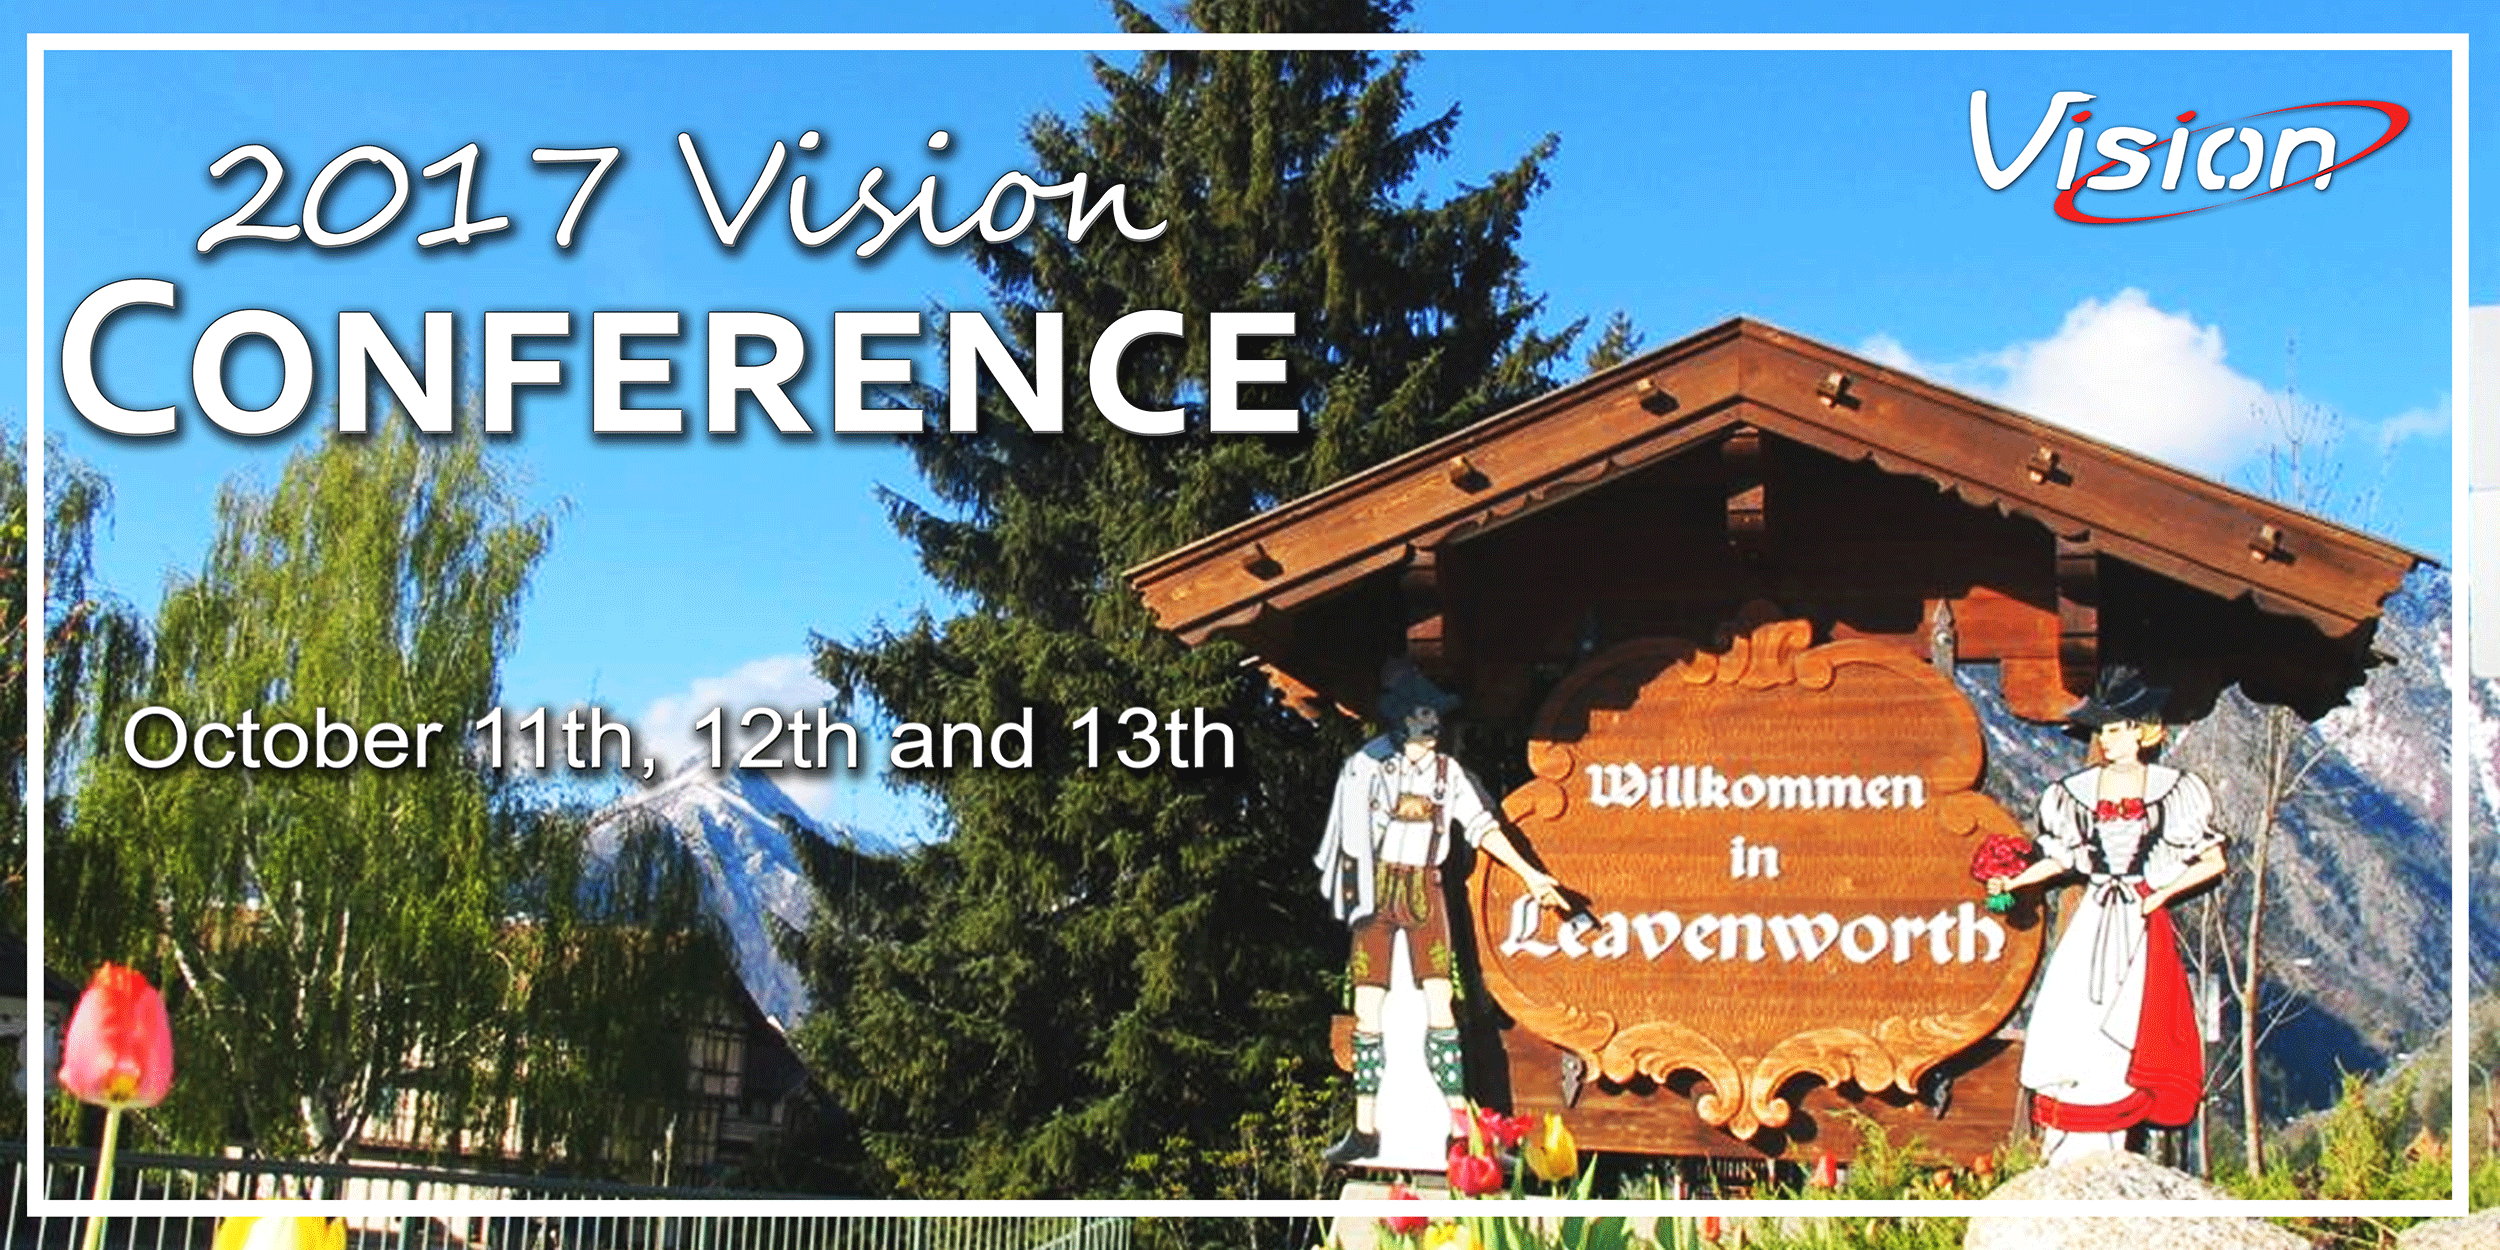 The 2017 Vision Conference